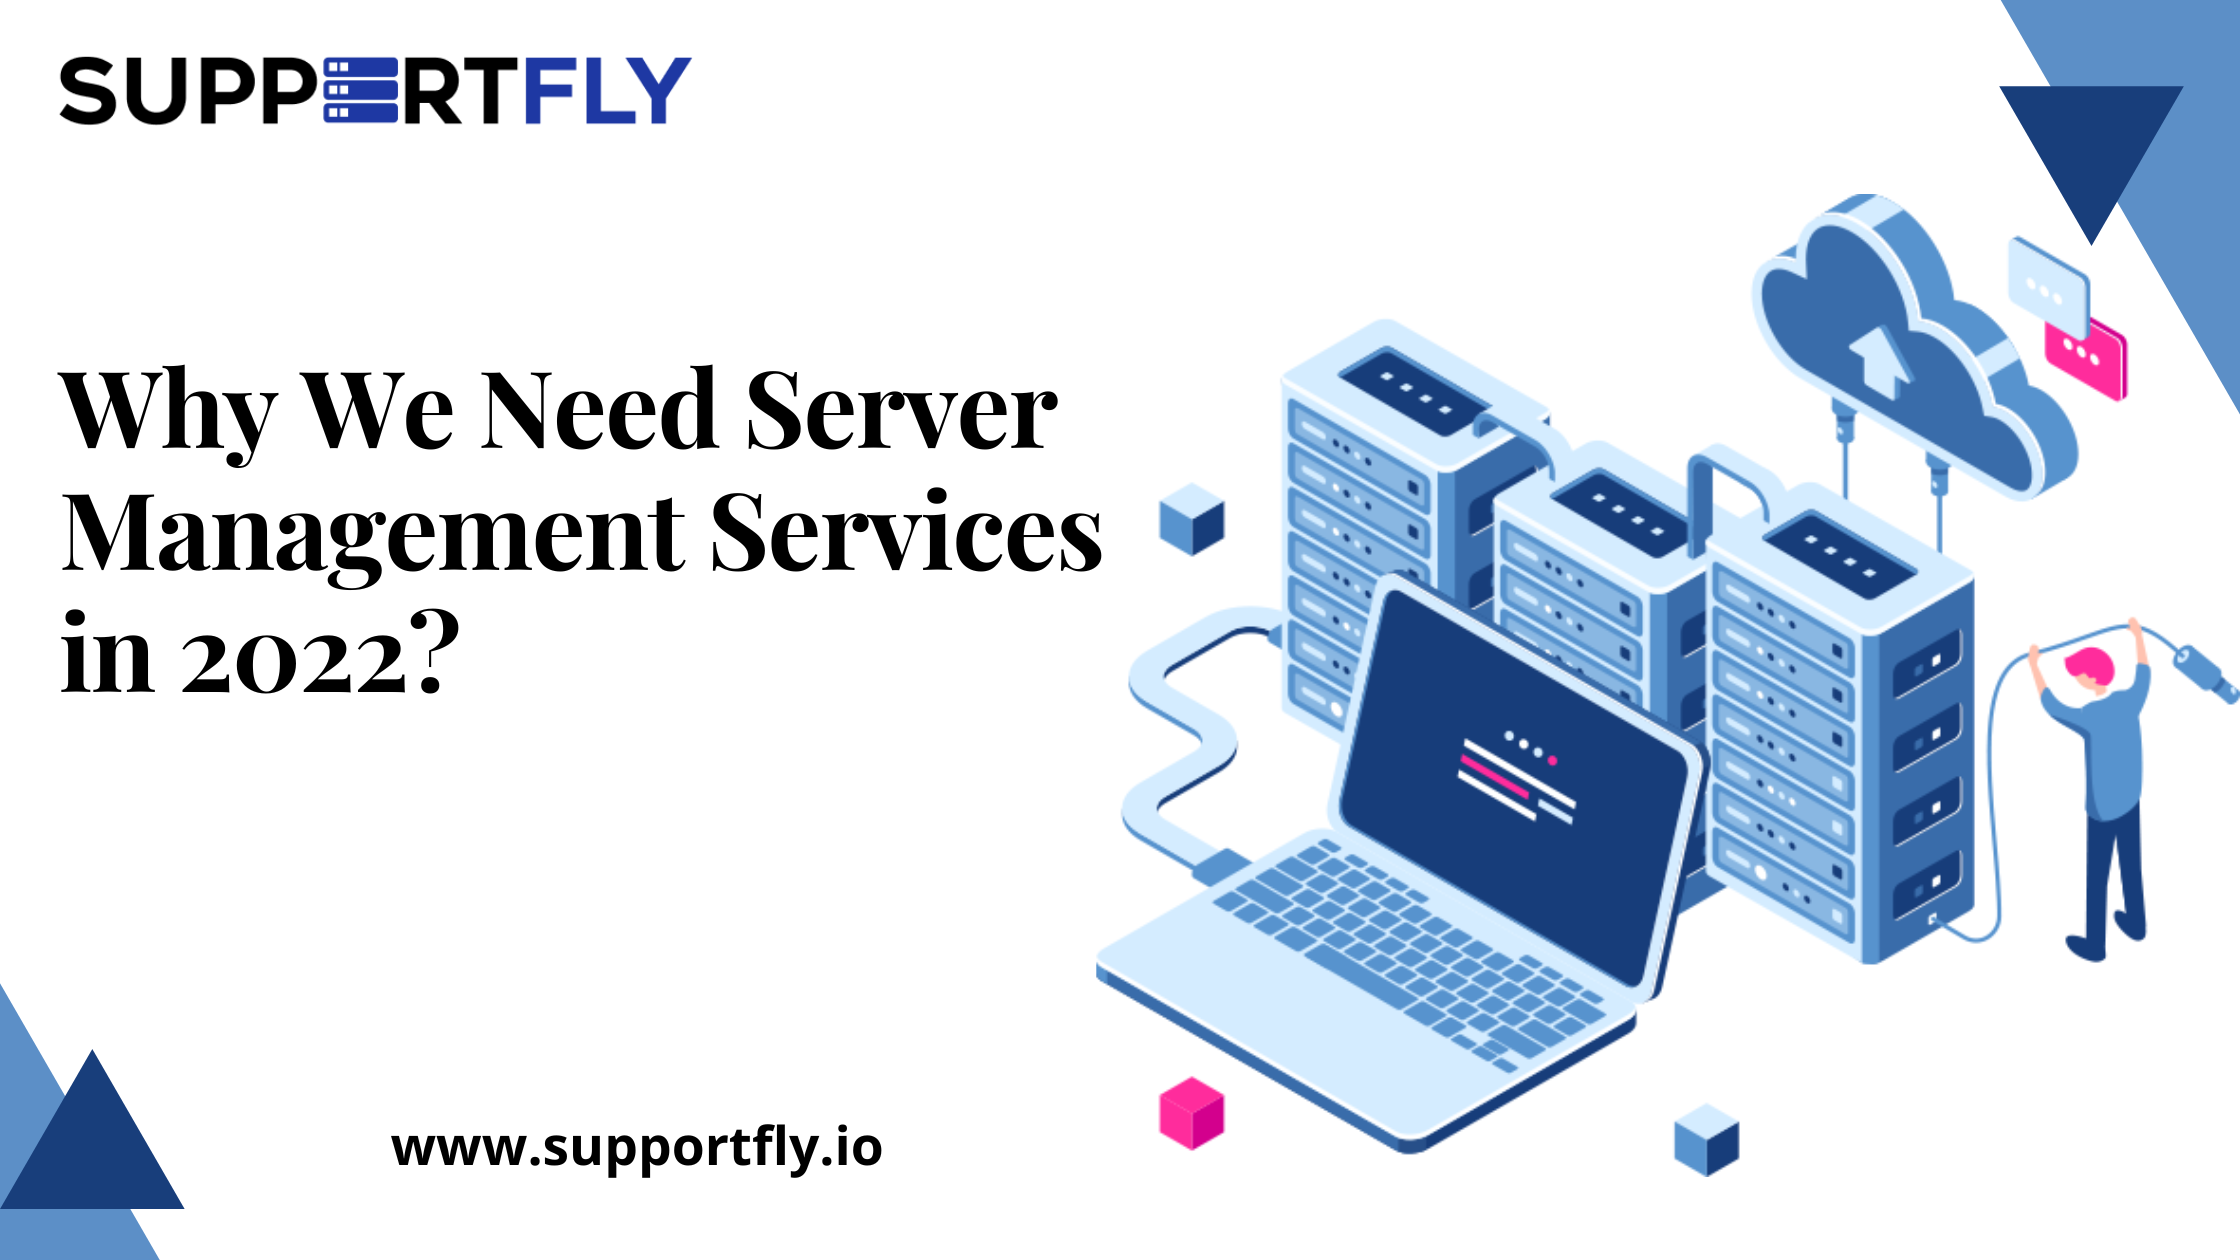 Why We Need Server Management Services in 2022?